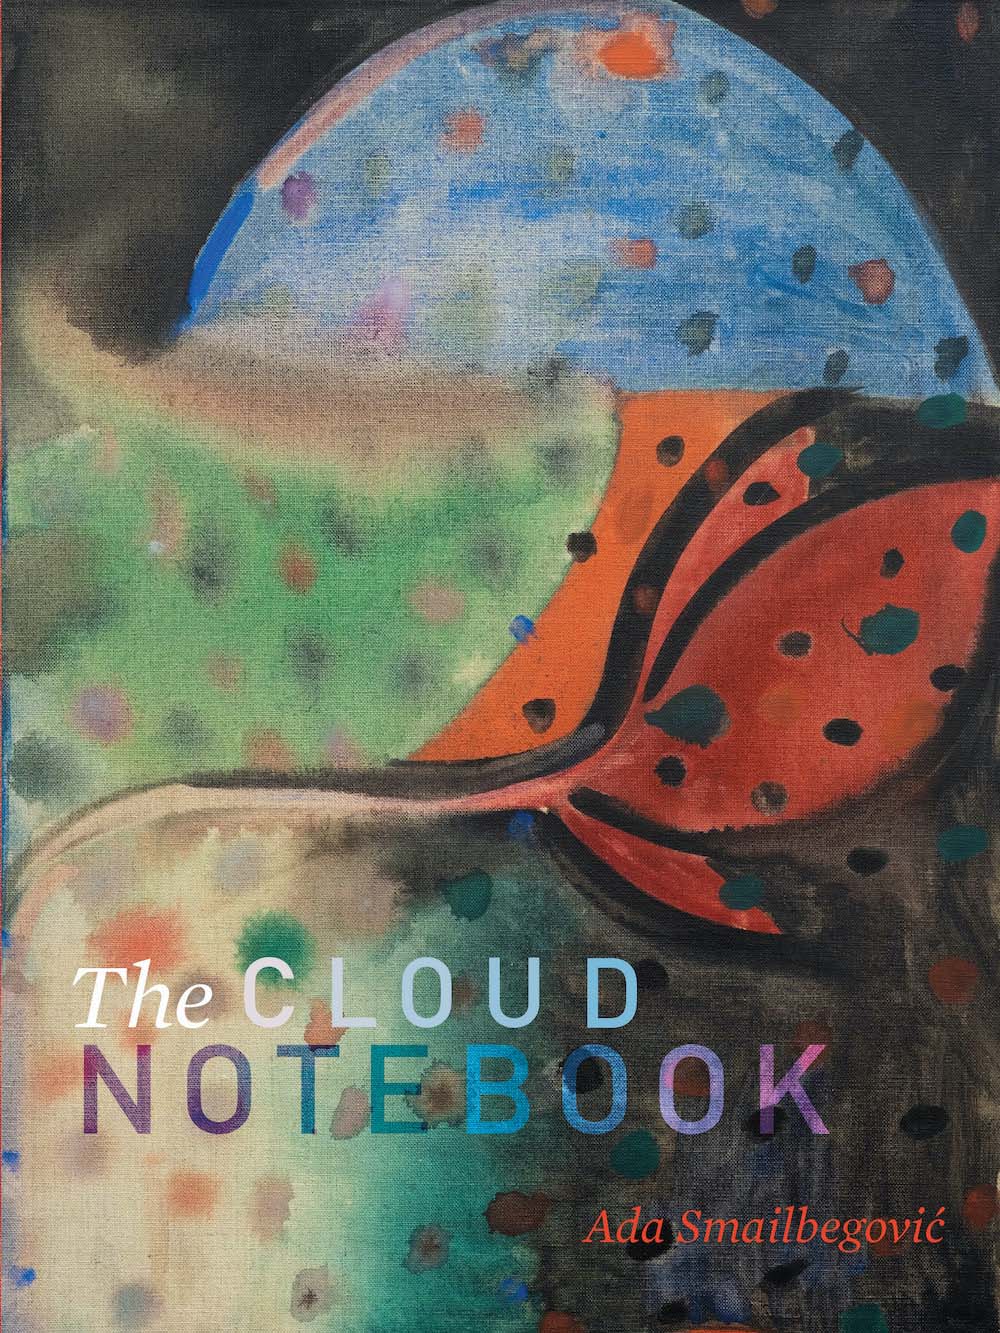 The Cloud Notebook